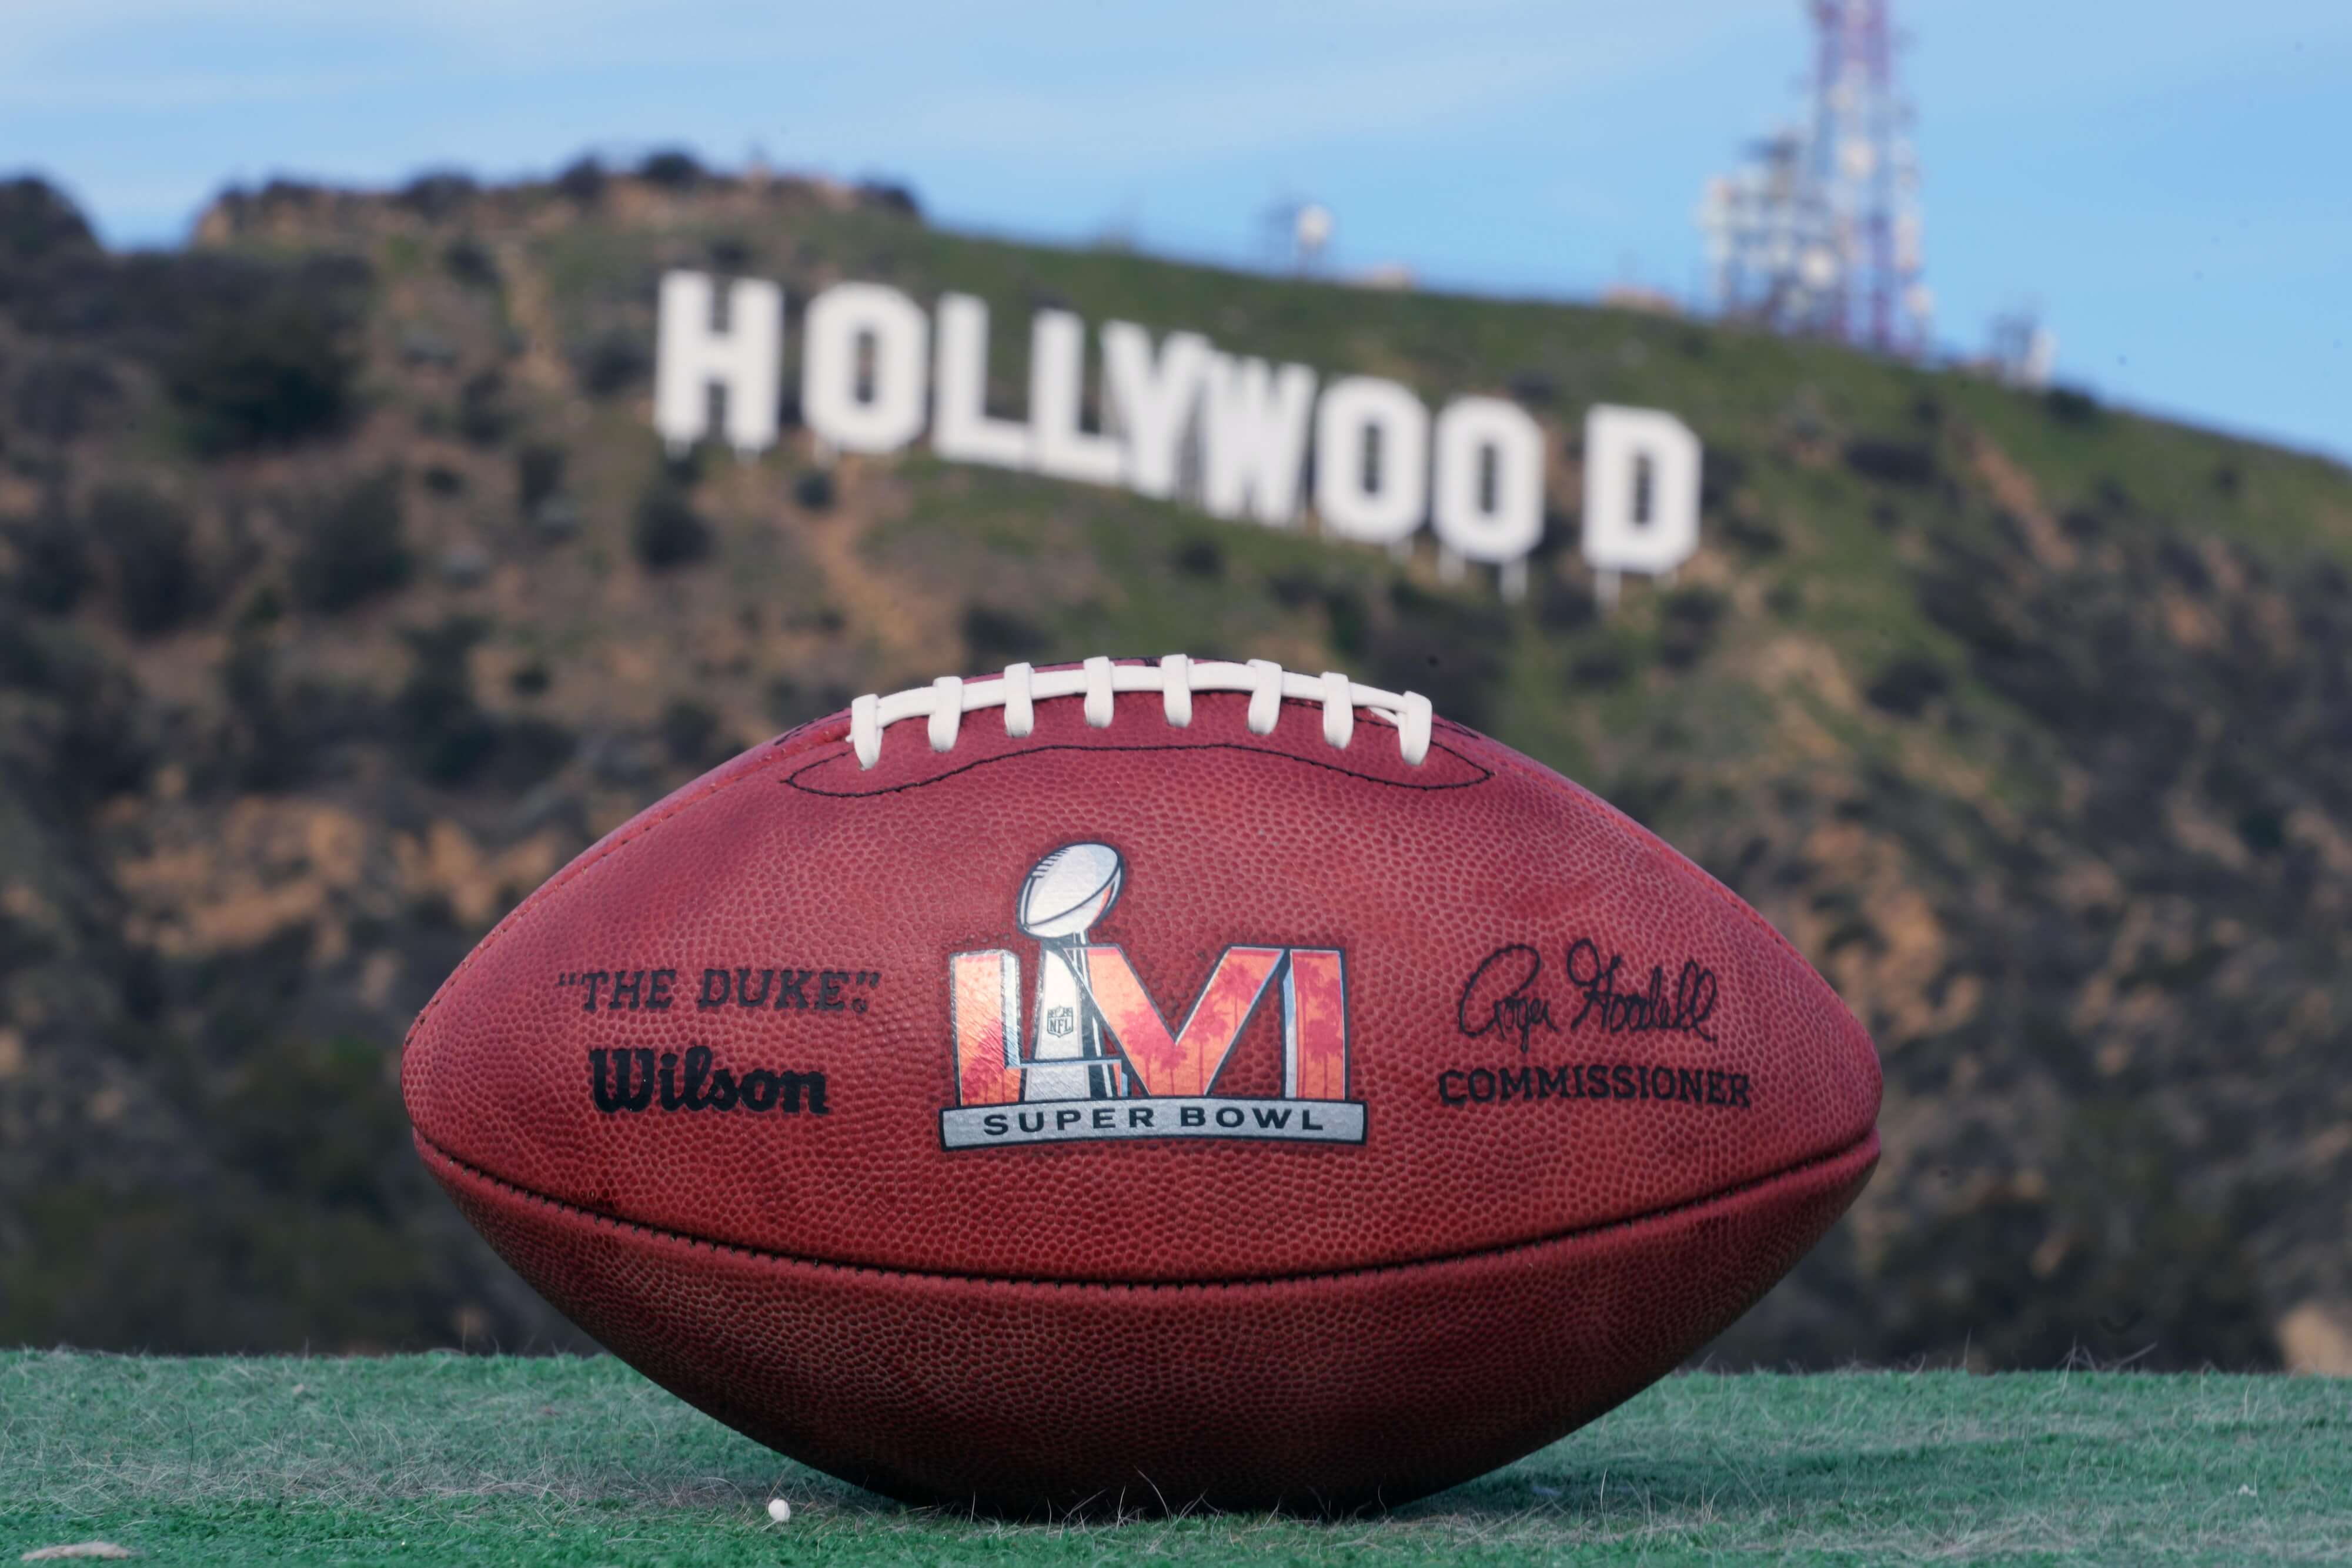 Jan 30, 2022; Los Angeles, California, USA; A NFL Wilson official Duke football with Super Bowl LVI logo is seen at the Hollywood sign.